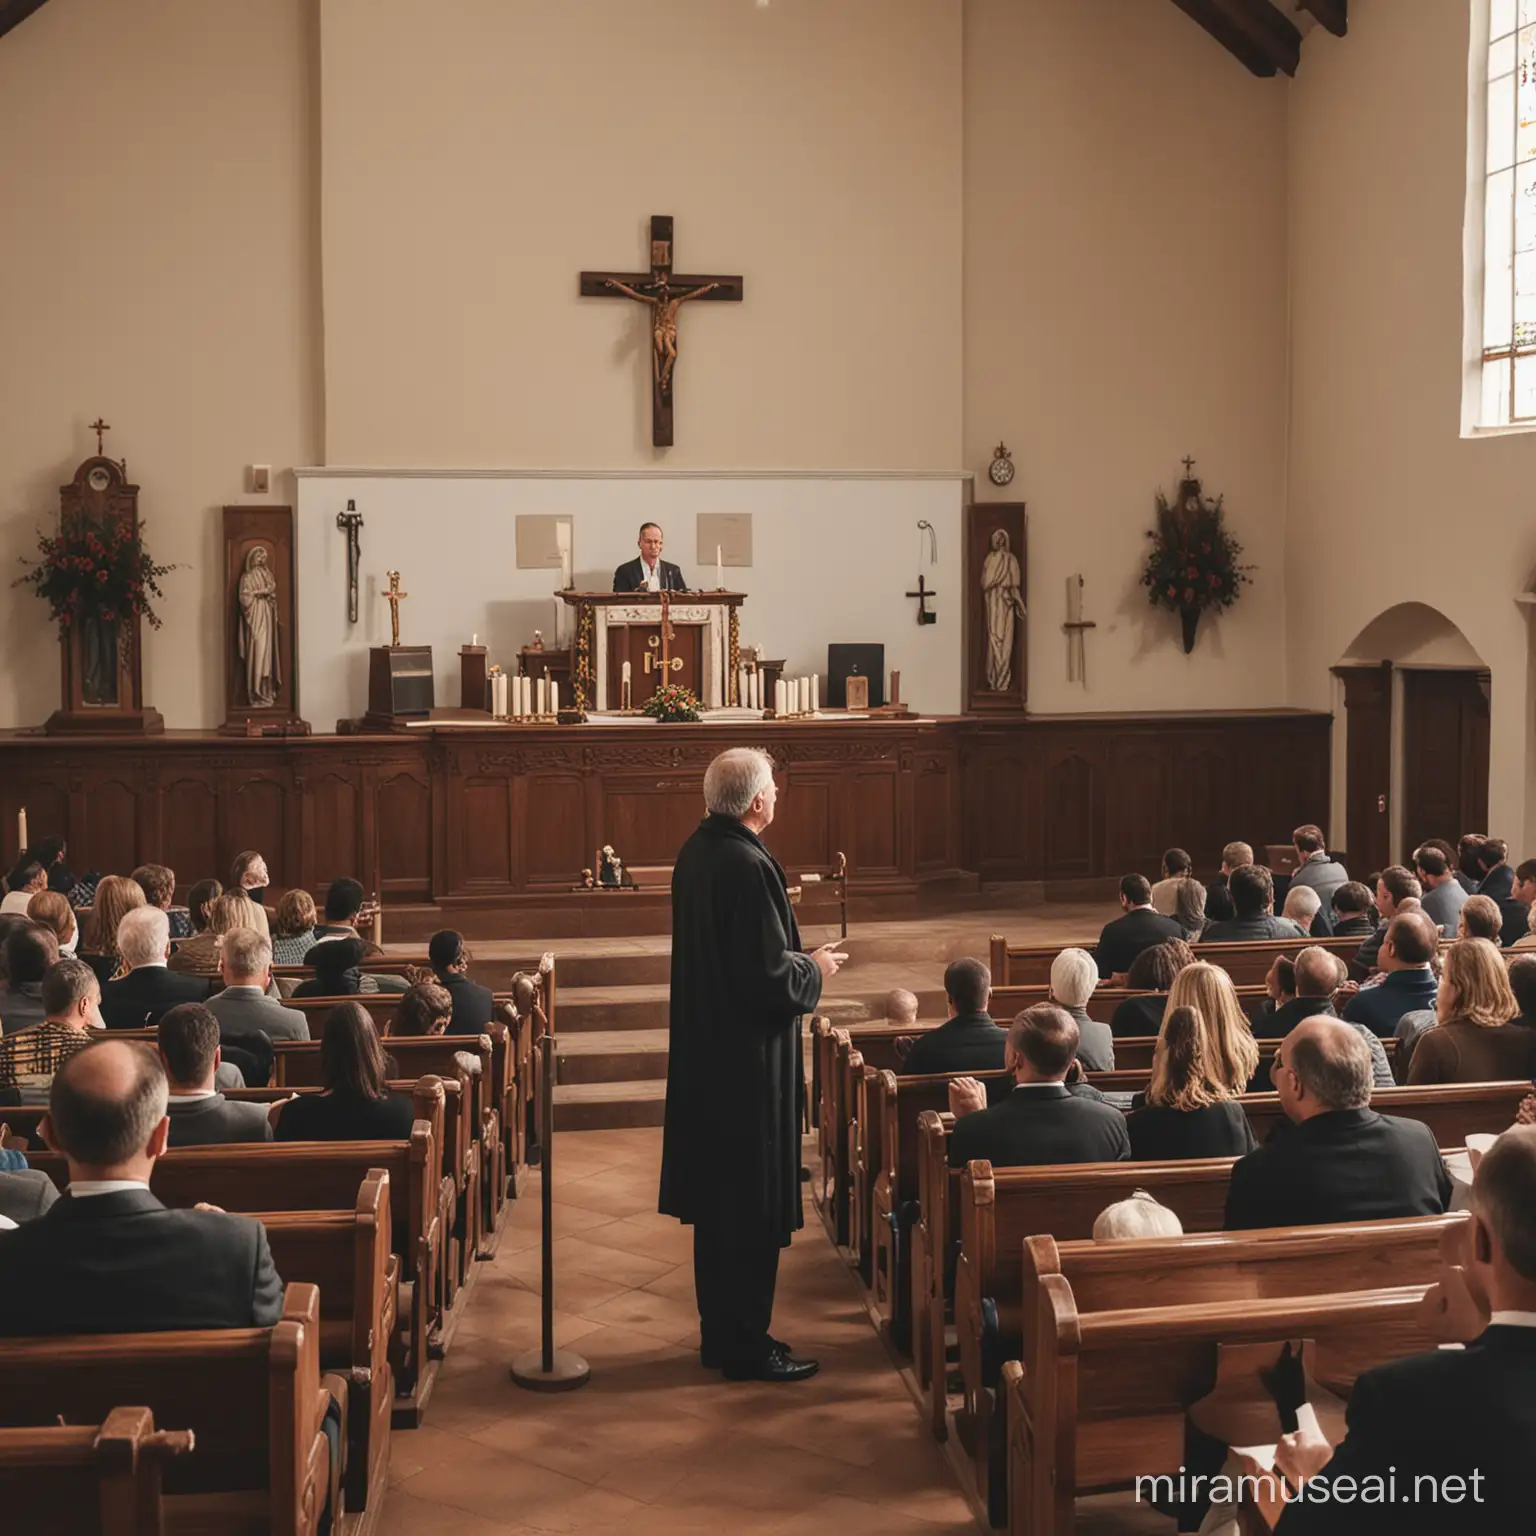 Man Preaching Gospel in a Church with an Altar and Attentive Congregation